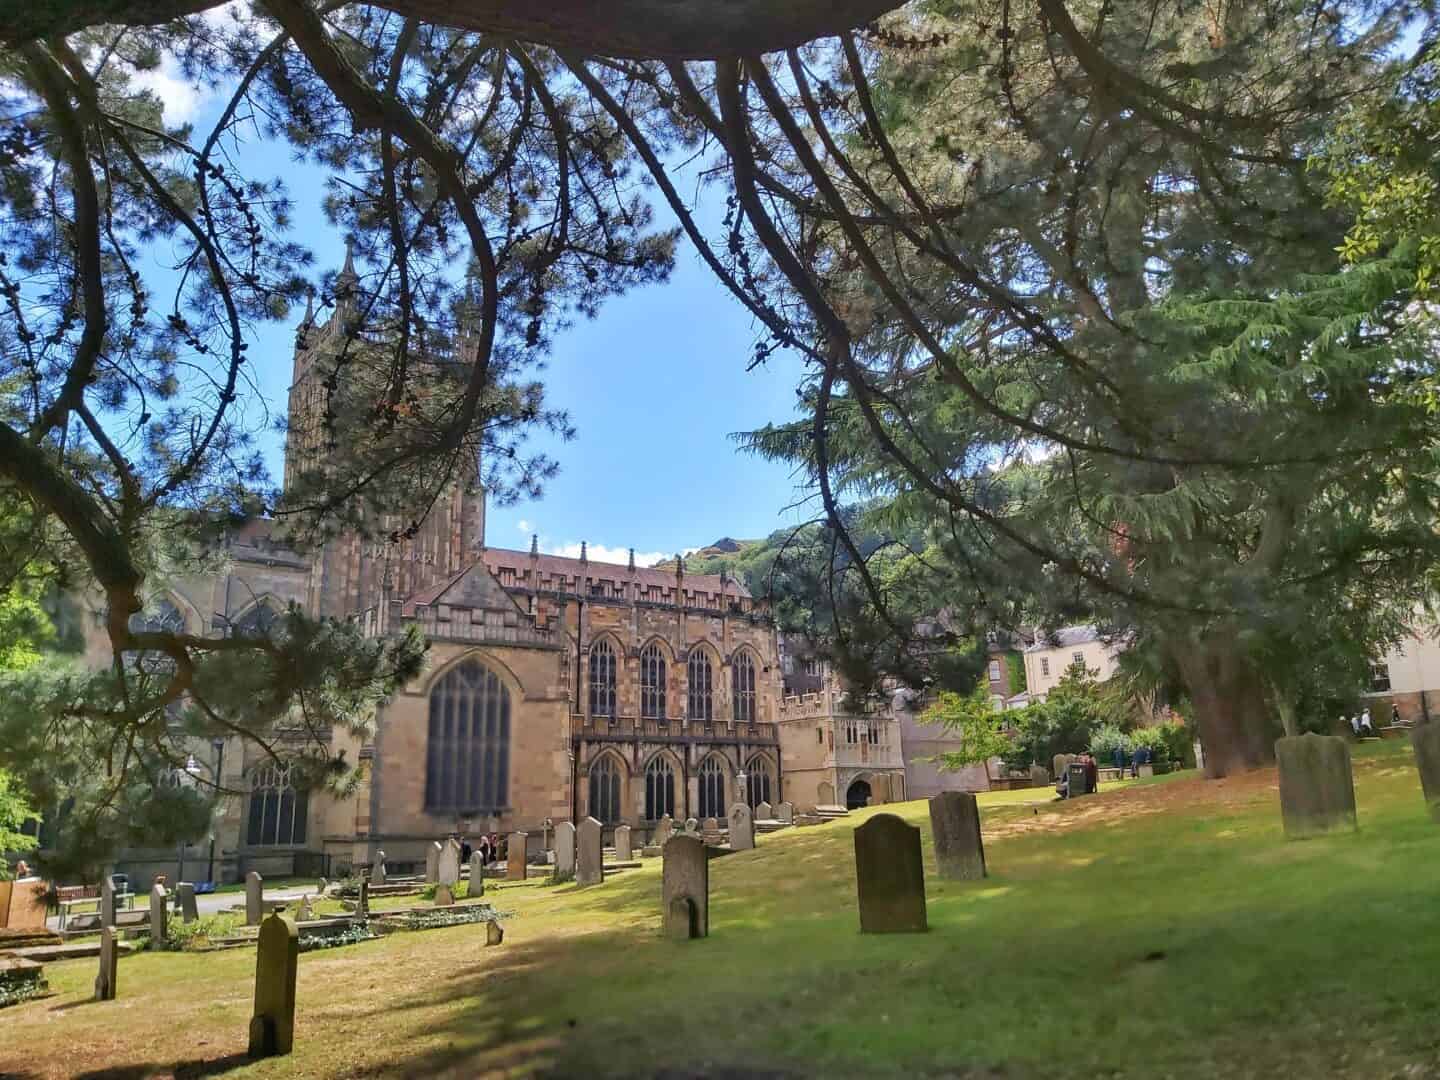 Malvern Priory viewed through the branches of an evergreen tree